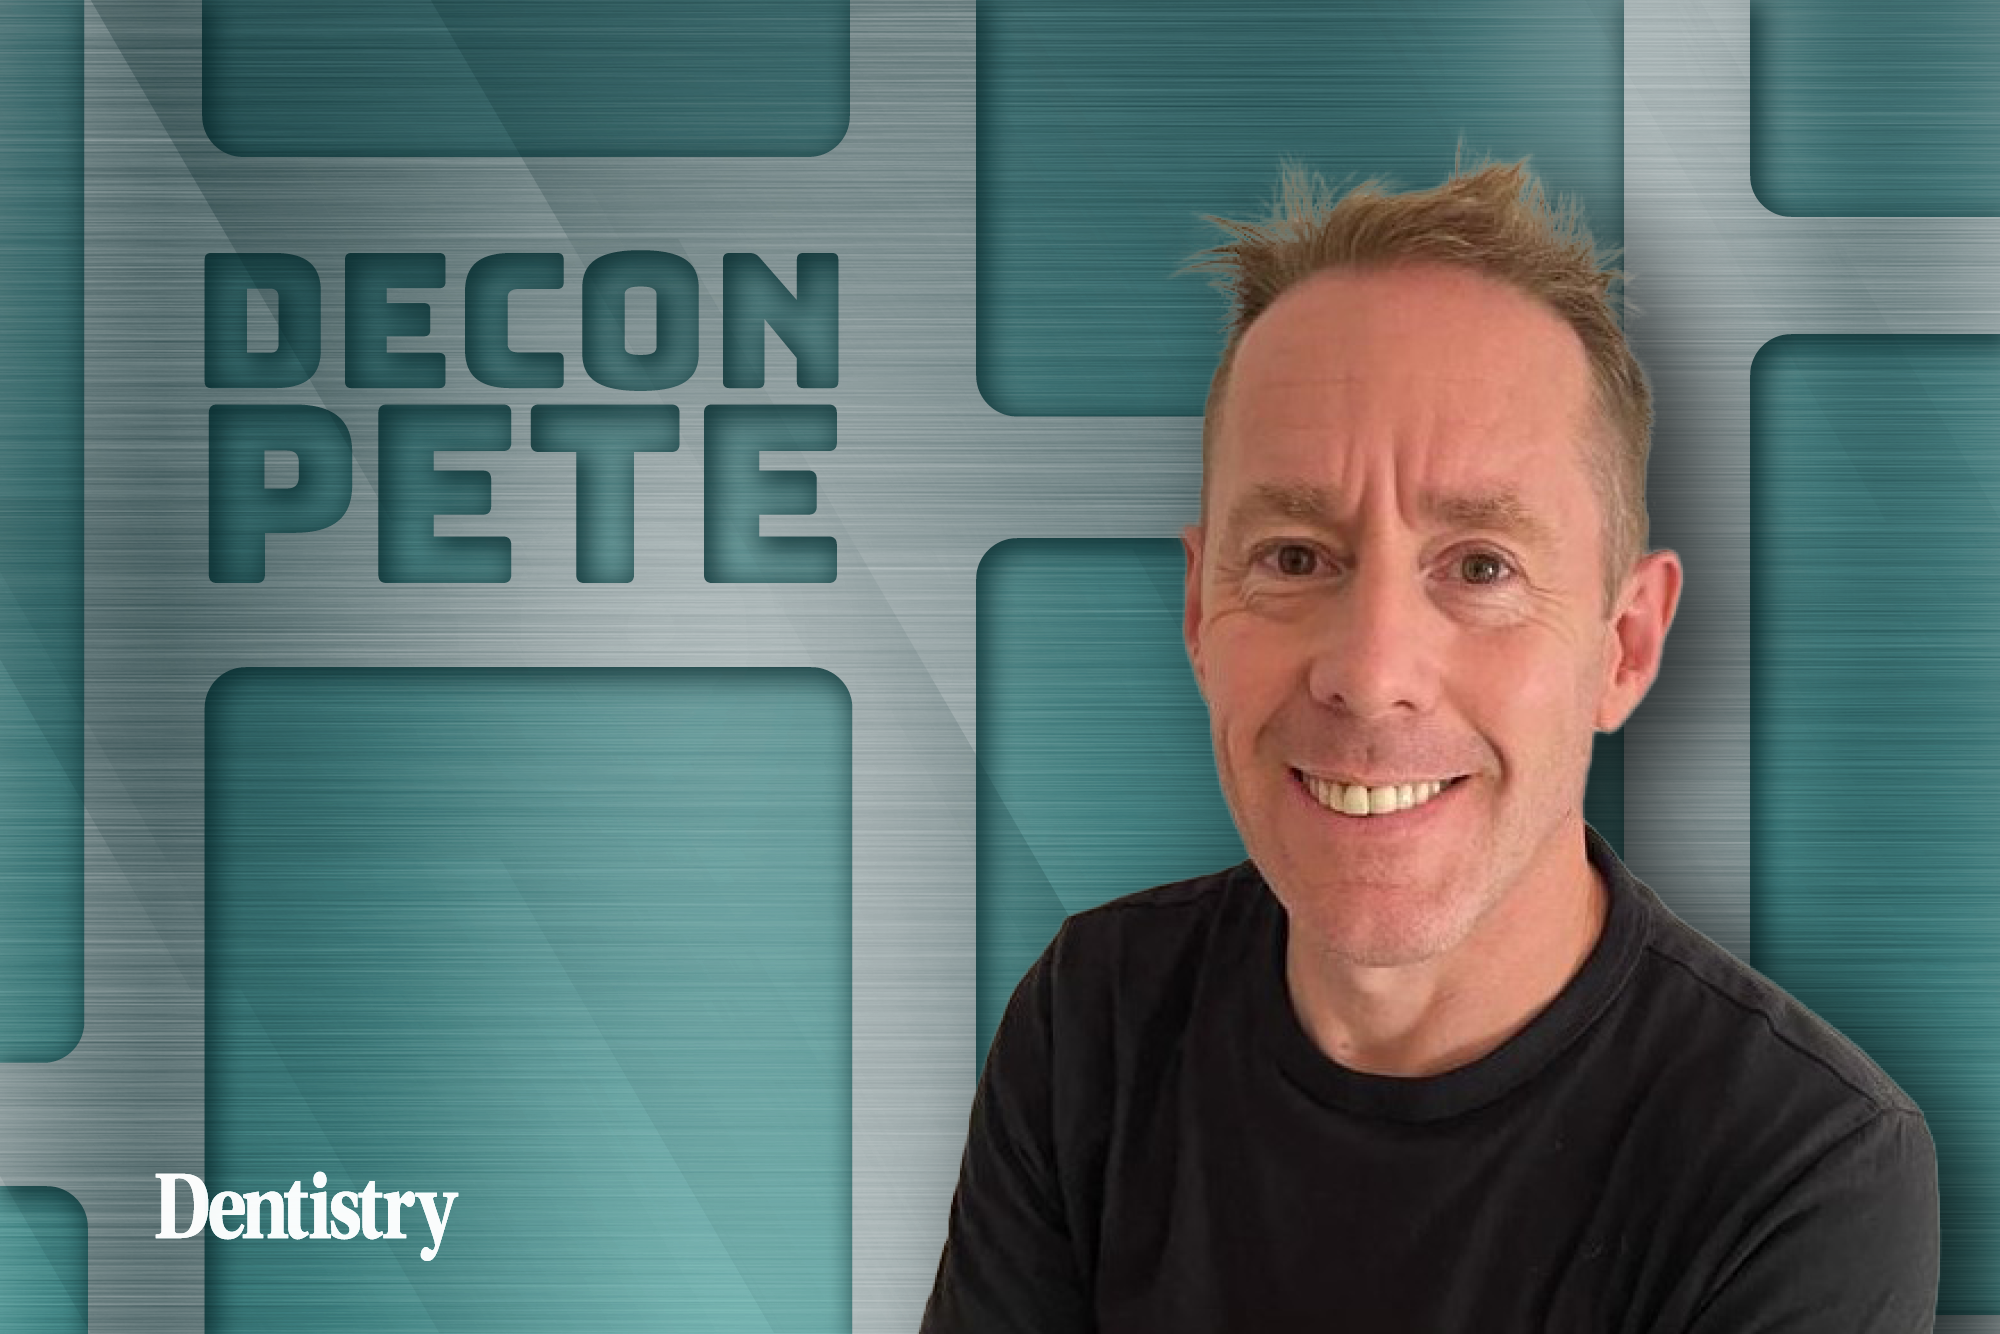 This month, Decon Pete discusses the recent healthcare waste management updates and the new protocols practices will need to implement.